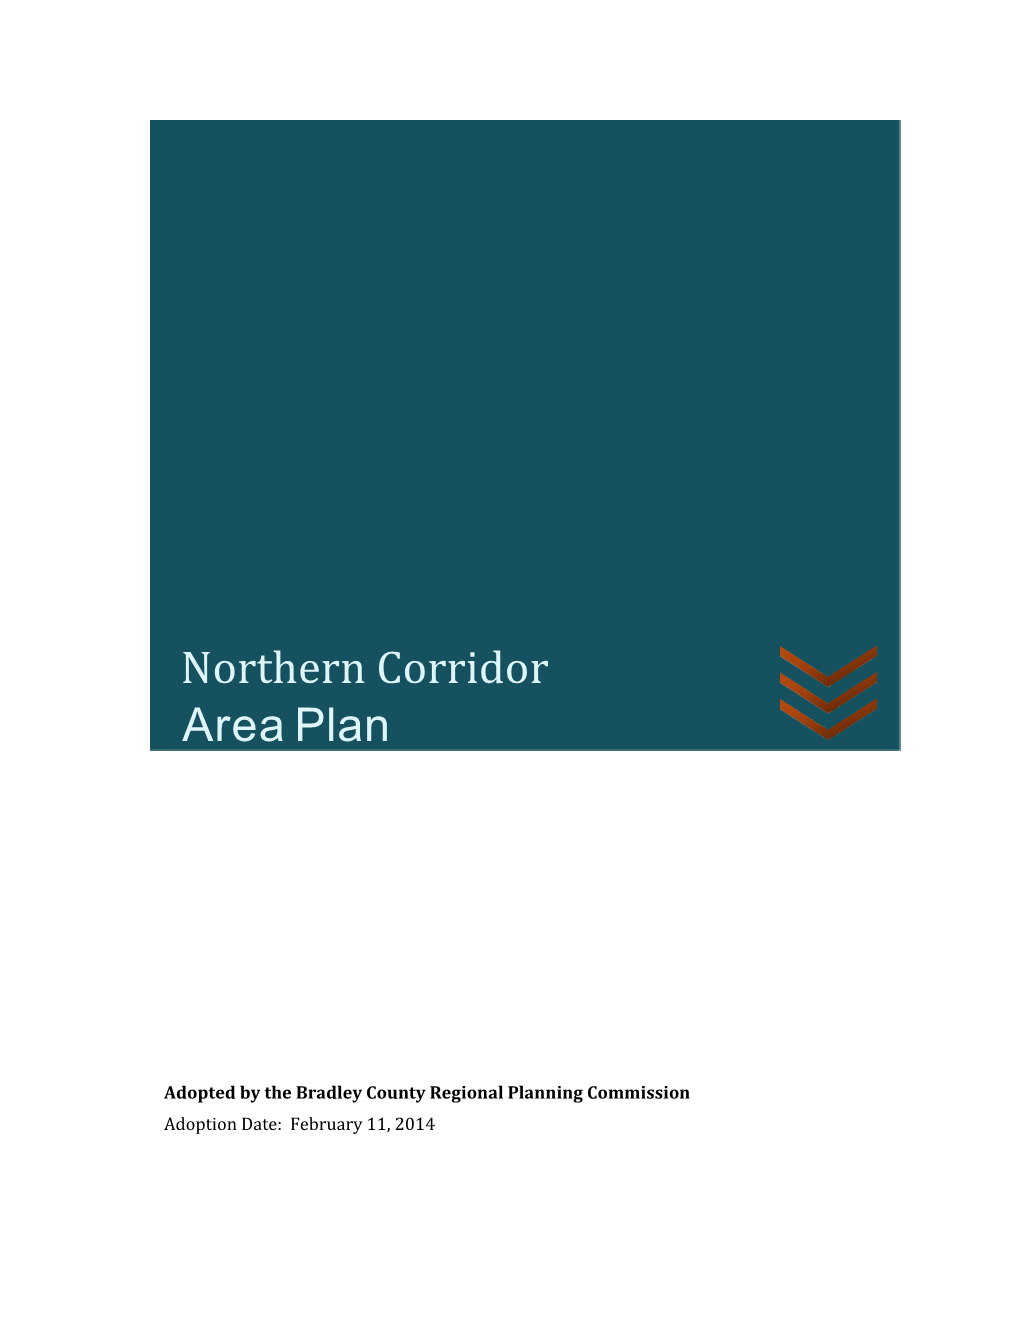 Northern Corridor Area Plan Is the Result of This Targeted Planning Study